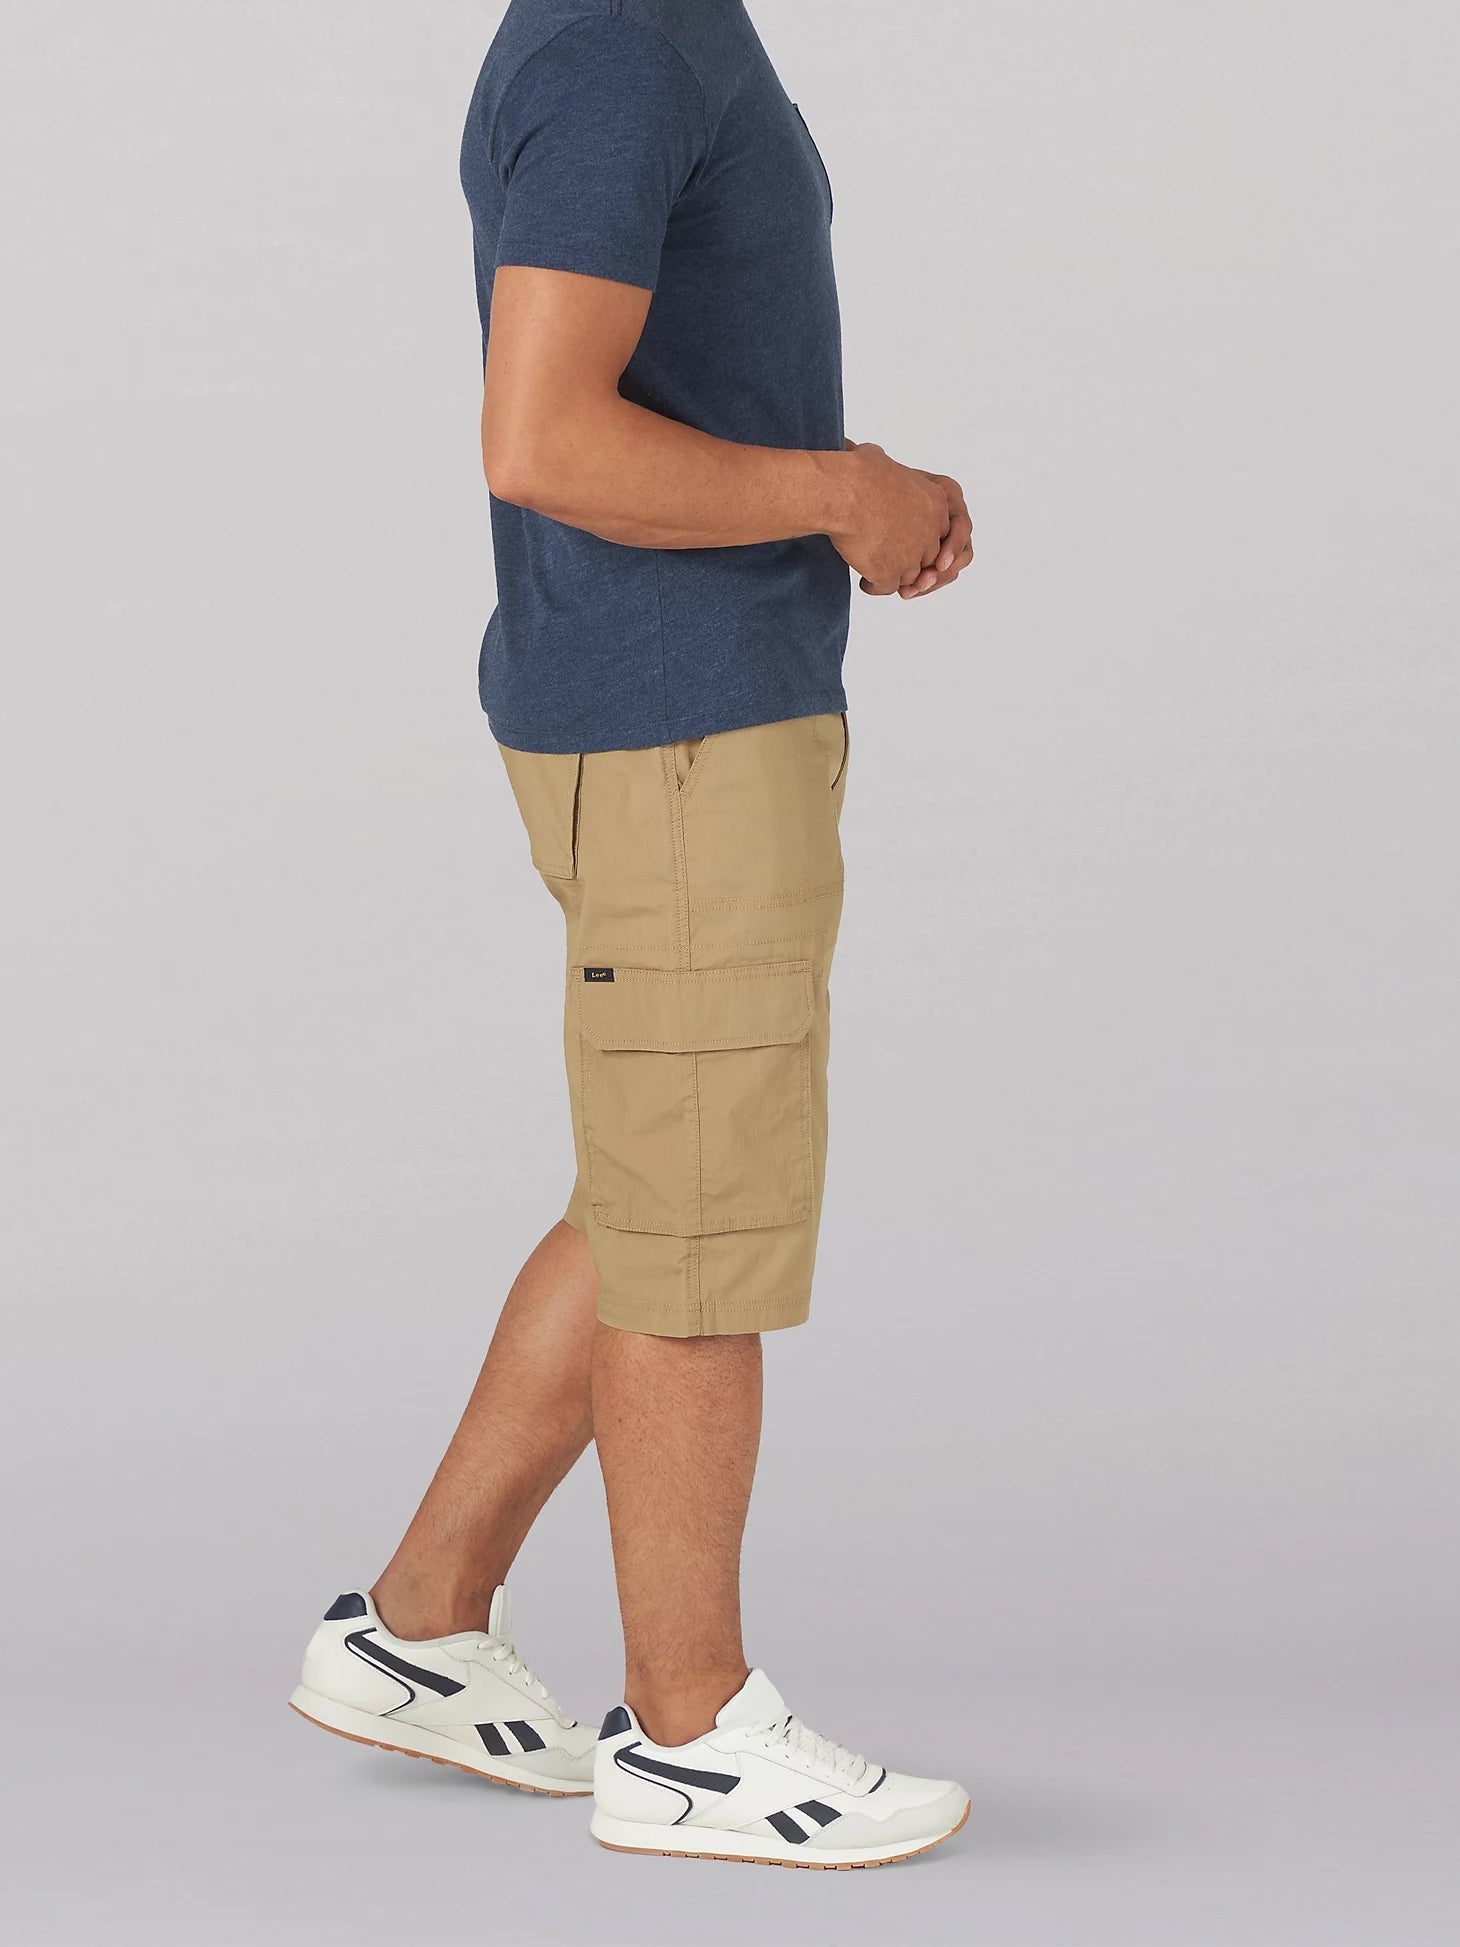 Lee 2314313 Extreme Motion Cameron Relaxed Cargo Shorts in KC Khaki Side View